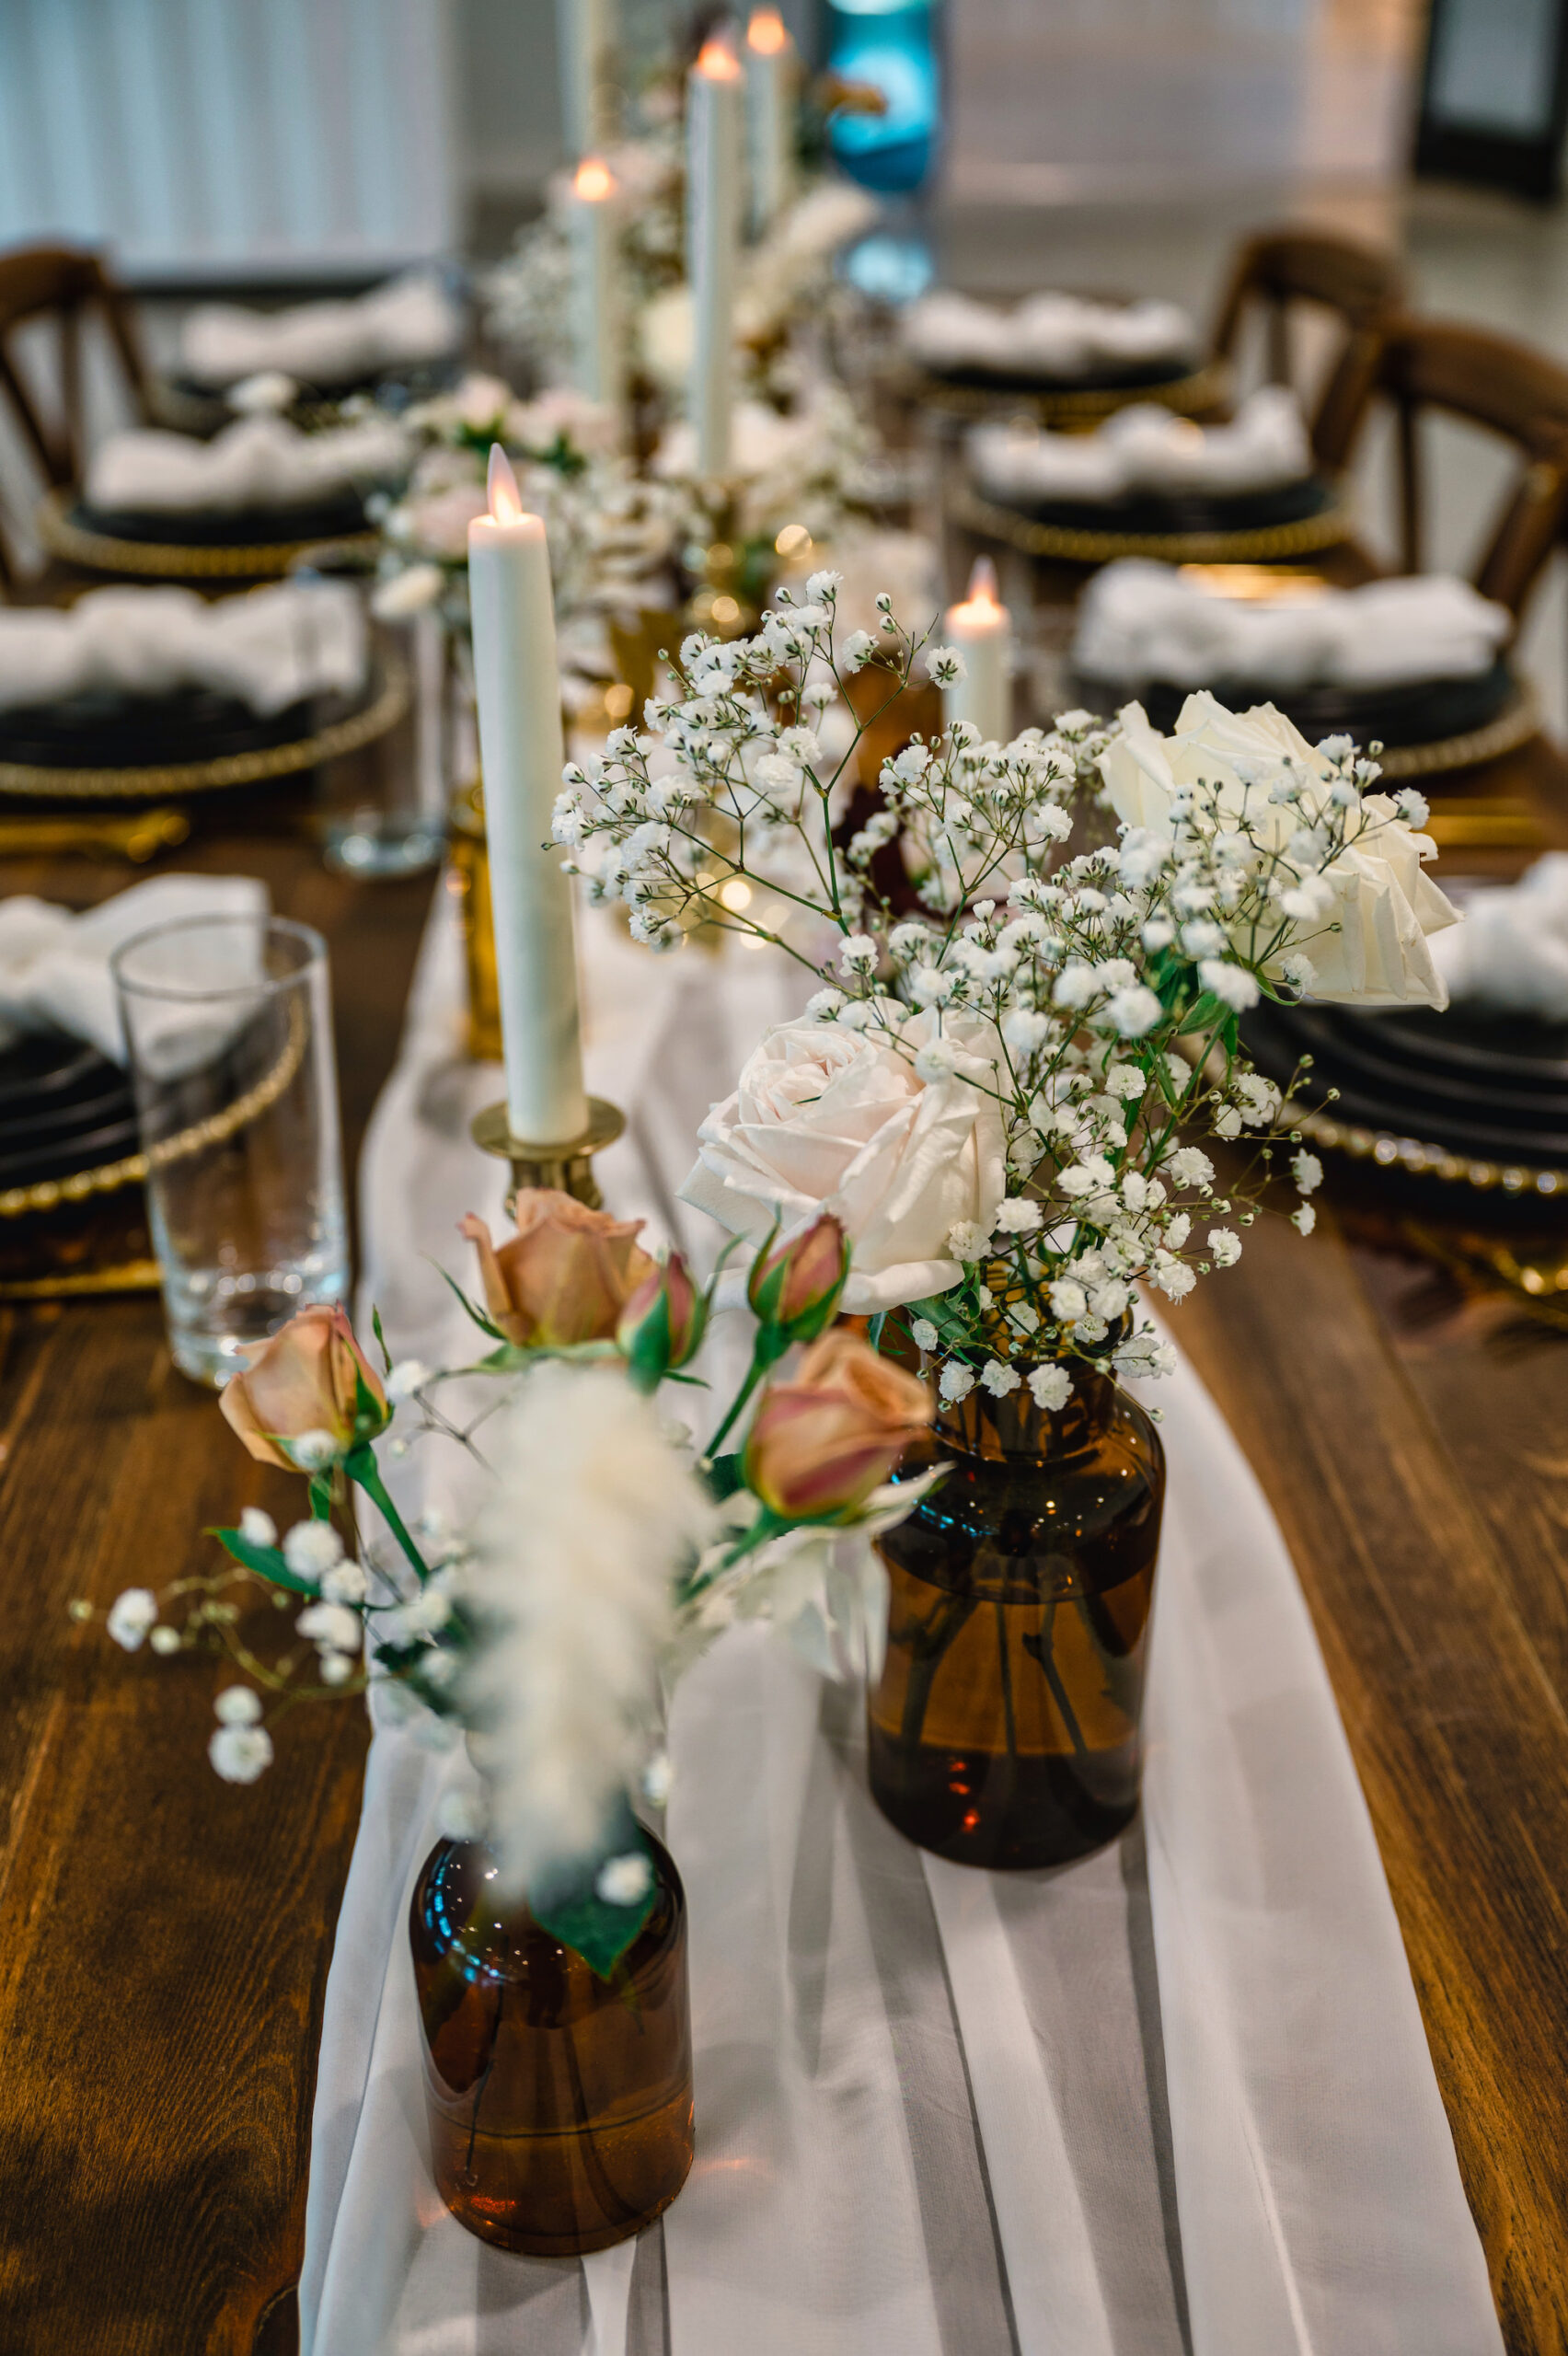 Amber Flower Vases with White and Pink Roses and Baby's Breath Wedding Reception Table Centerpiece Inspiration | Flameless White Taper Candle with Gold Holders | White Chiffon Table Runner Ideas